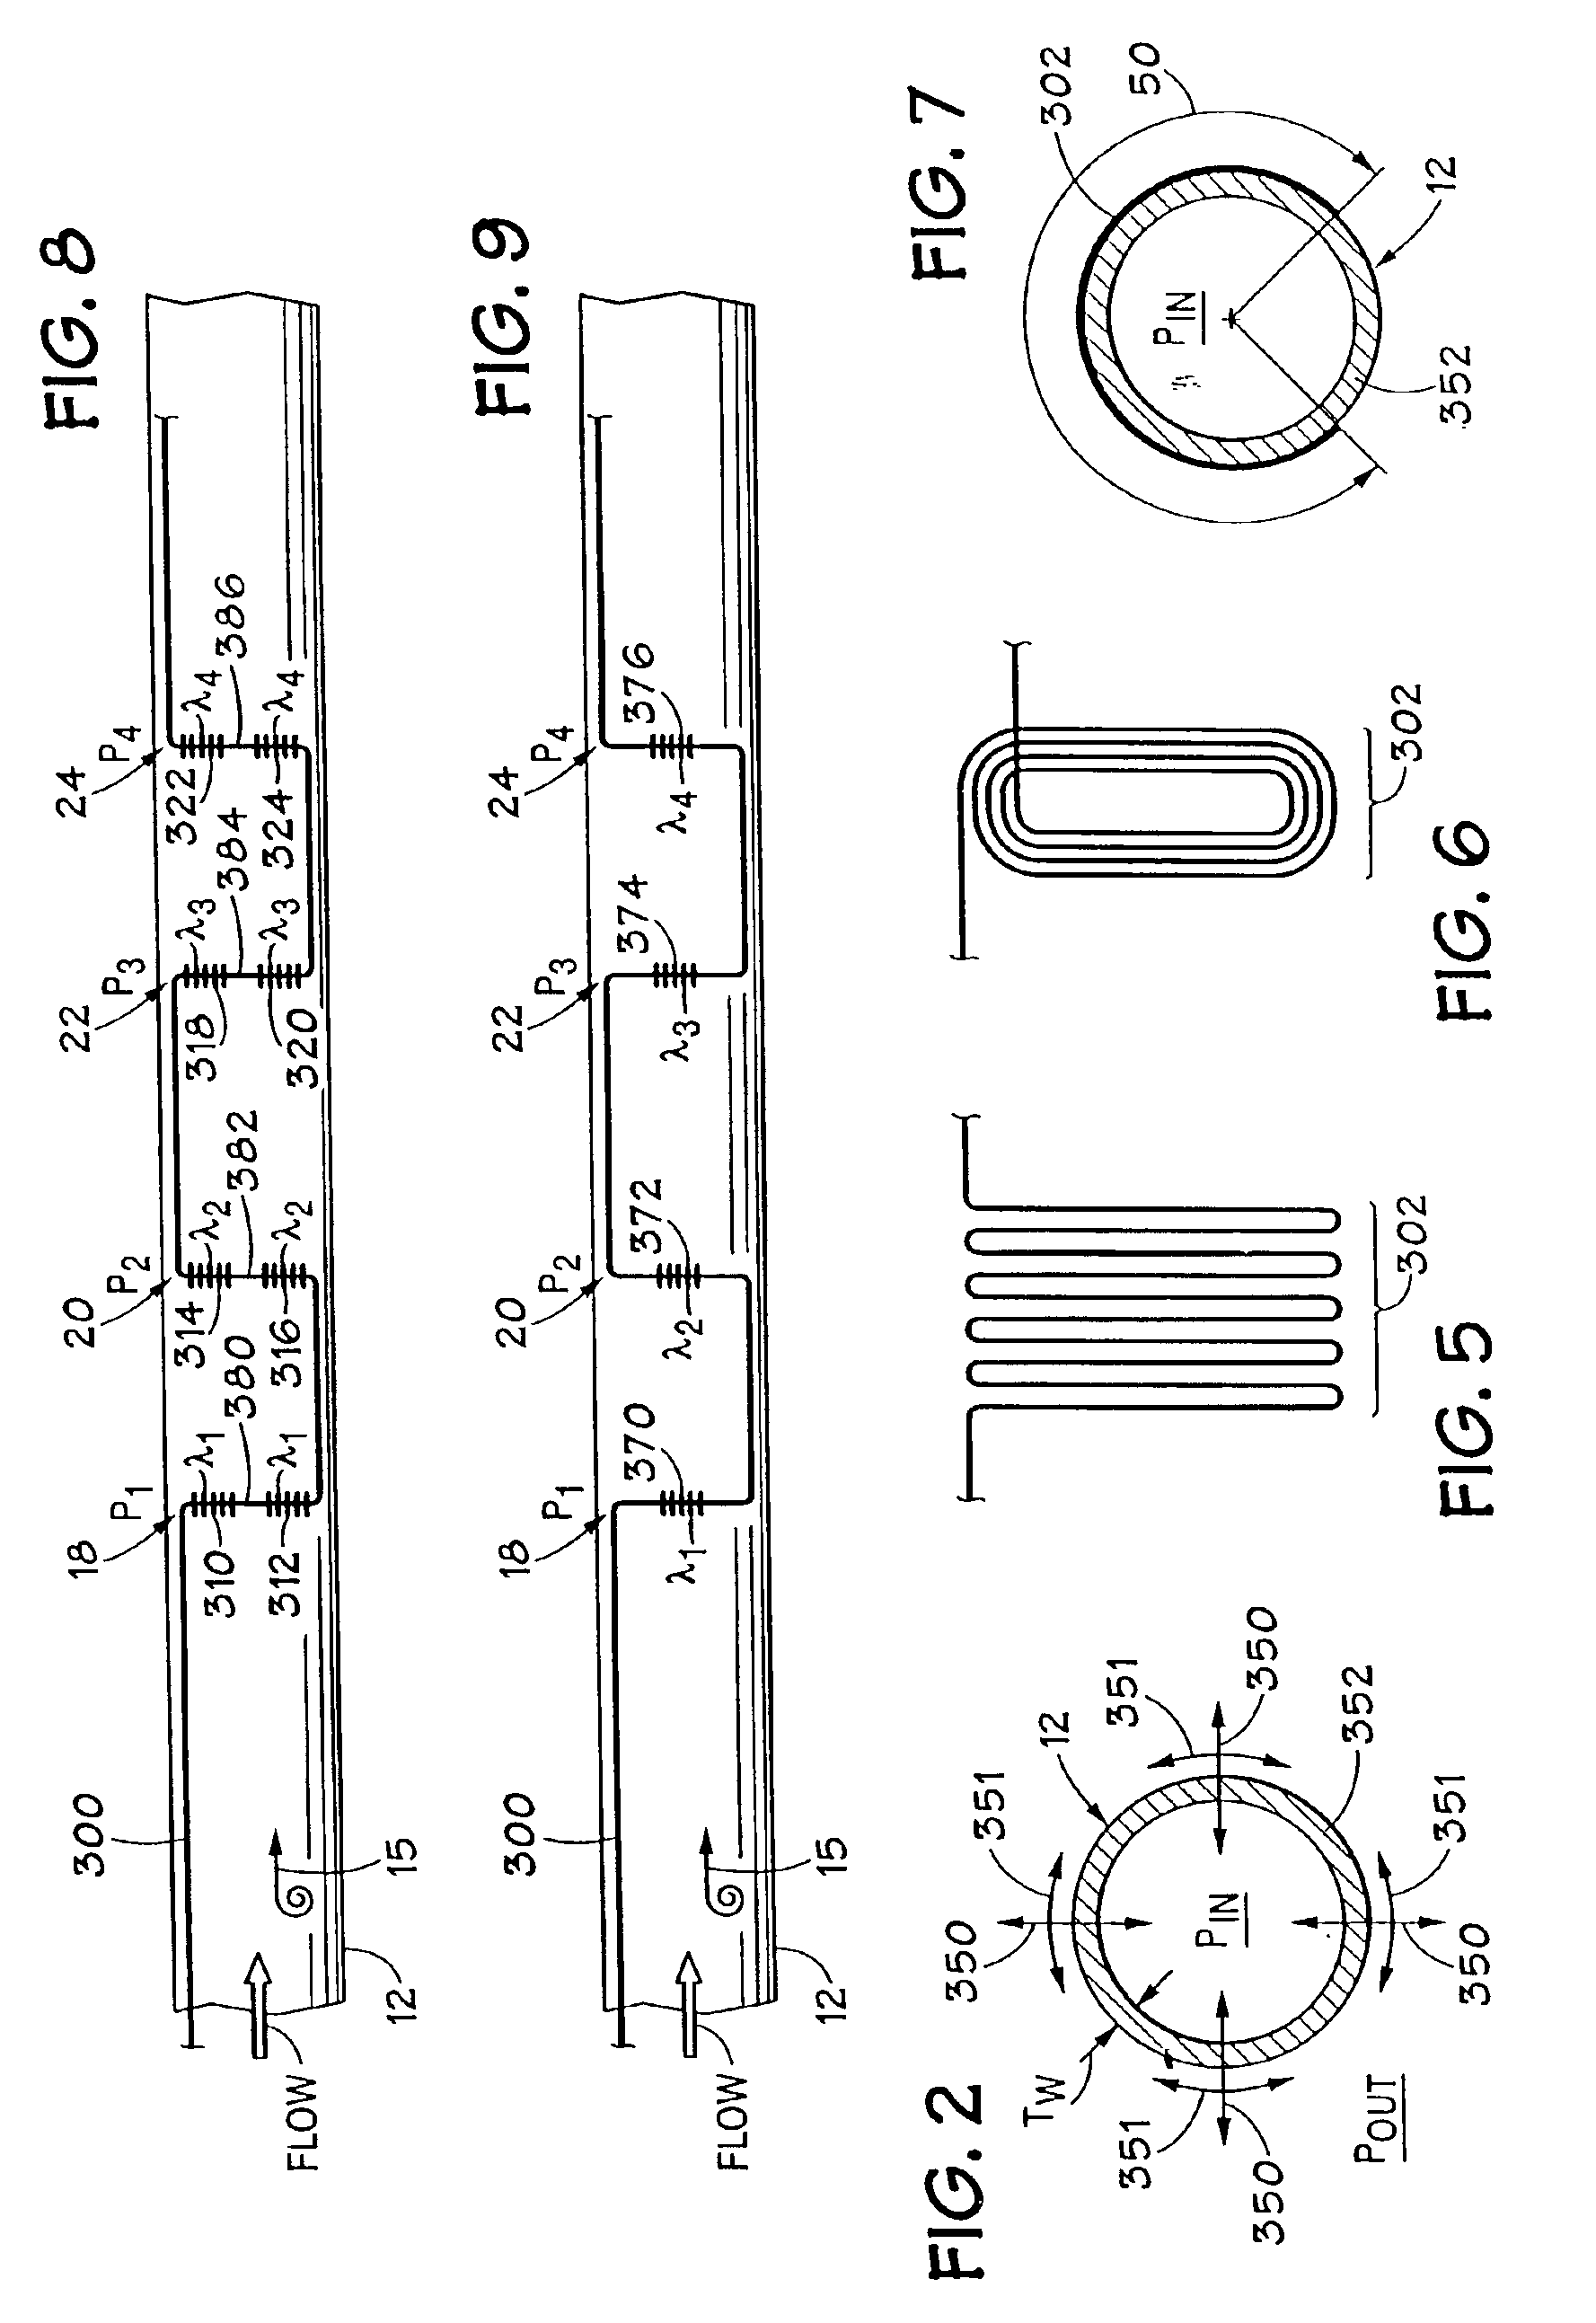 Apparatus and method having an optical fiber disposed circumferentially around the pipe for measuring unsteady pressure within a pipe